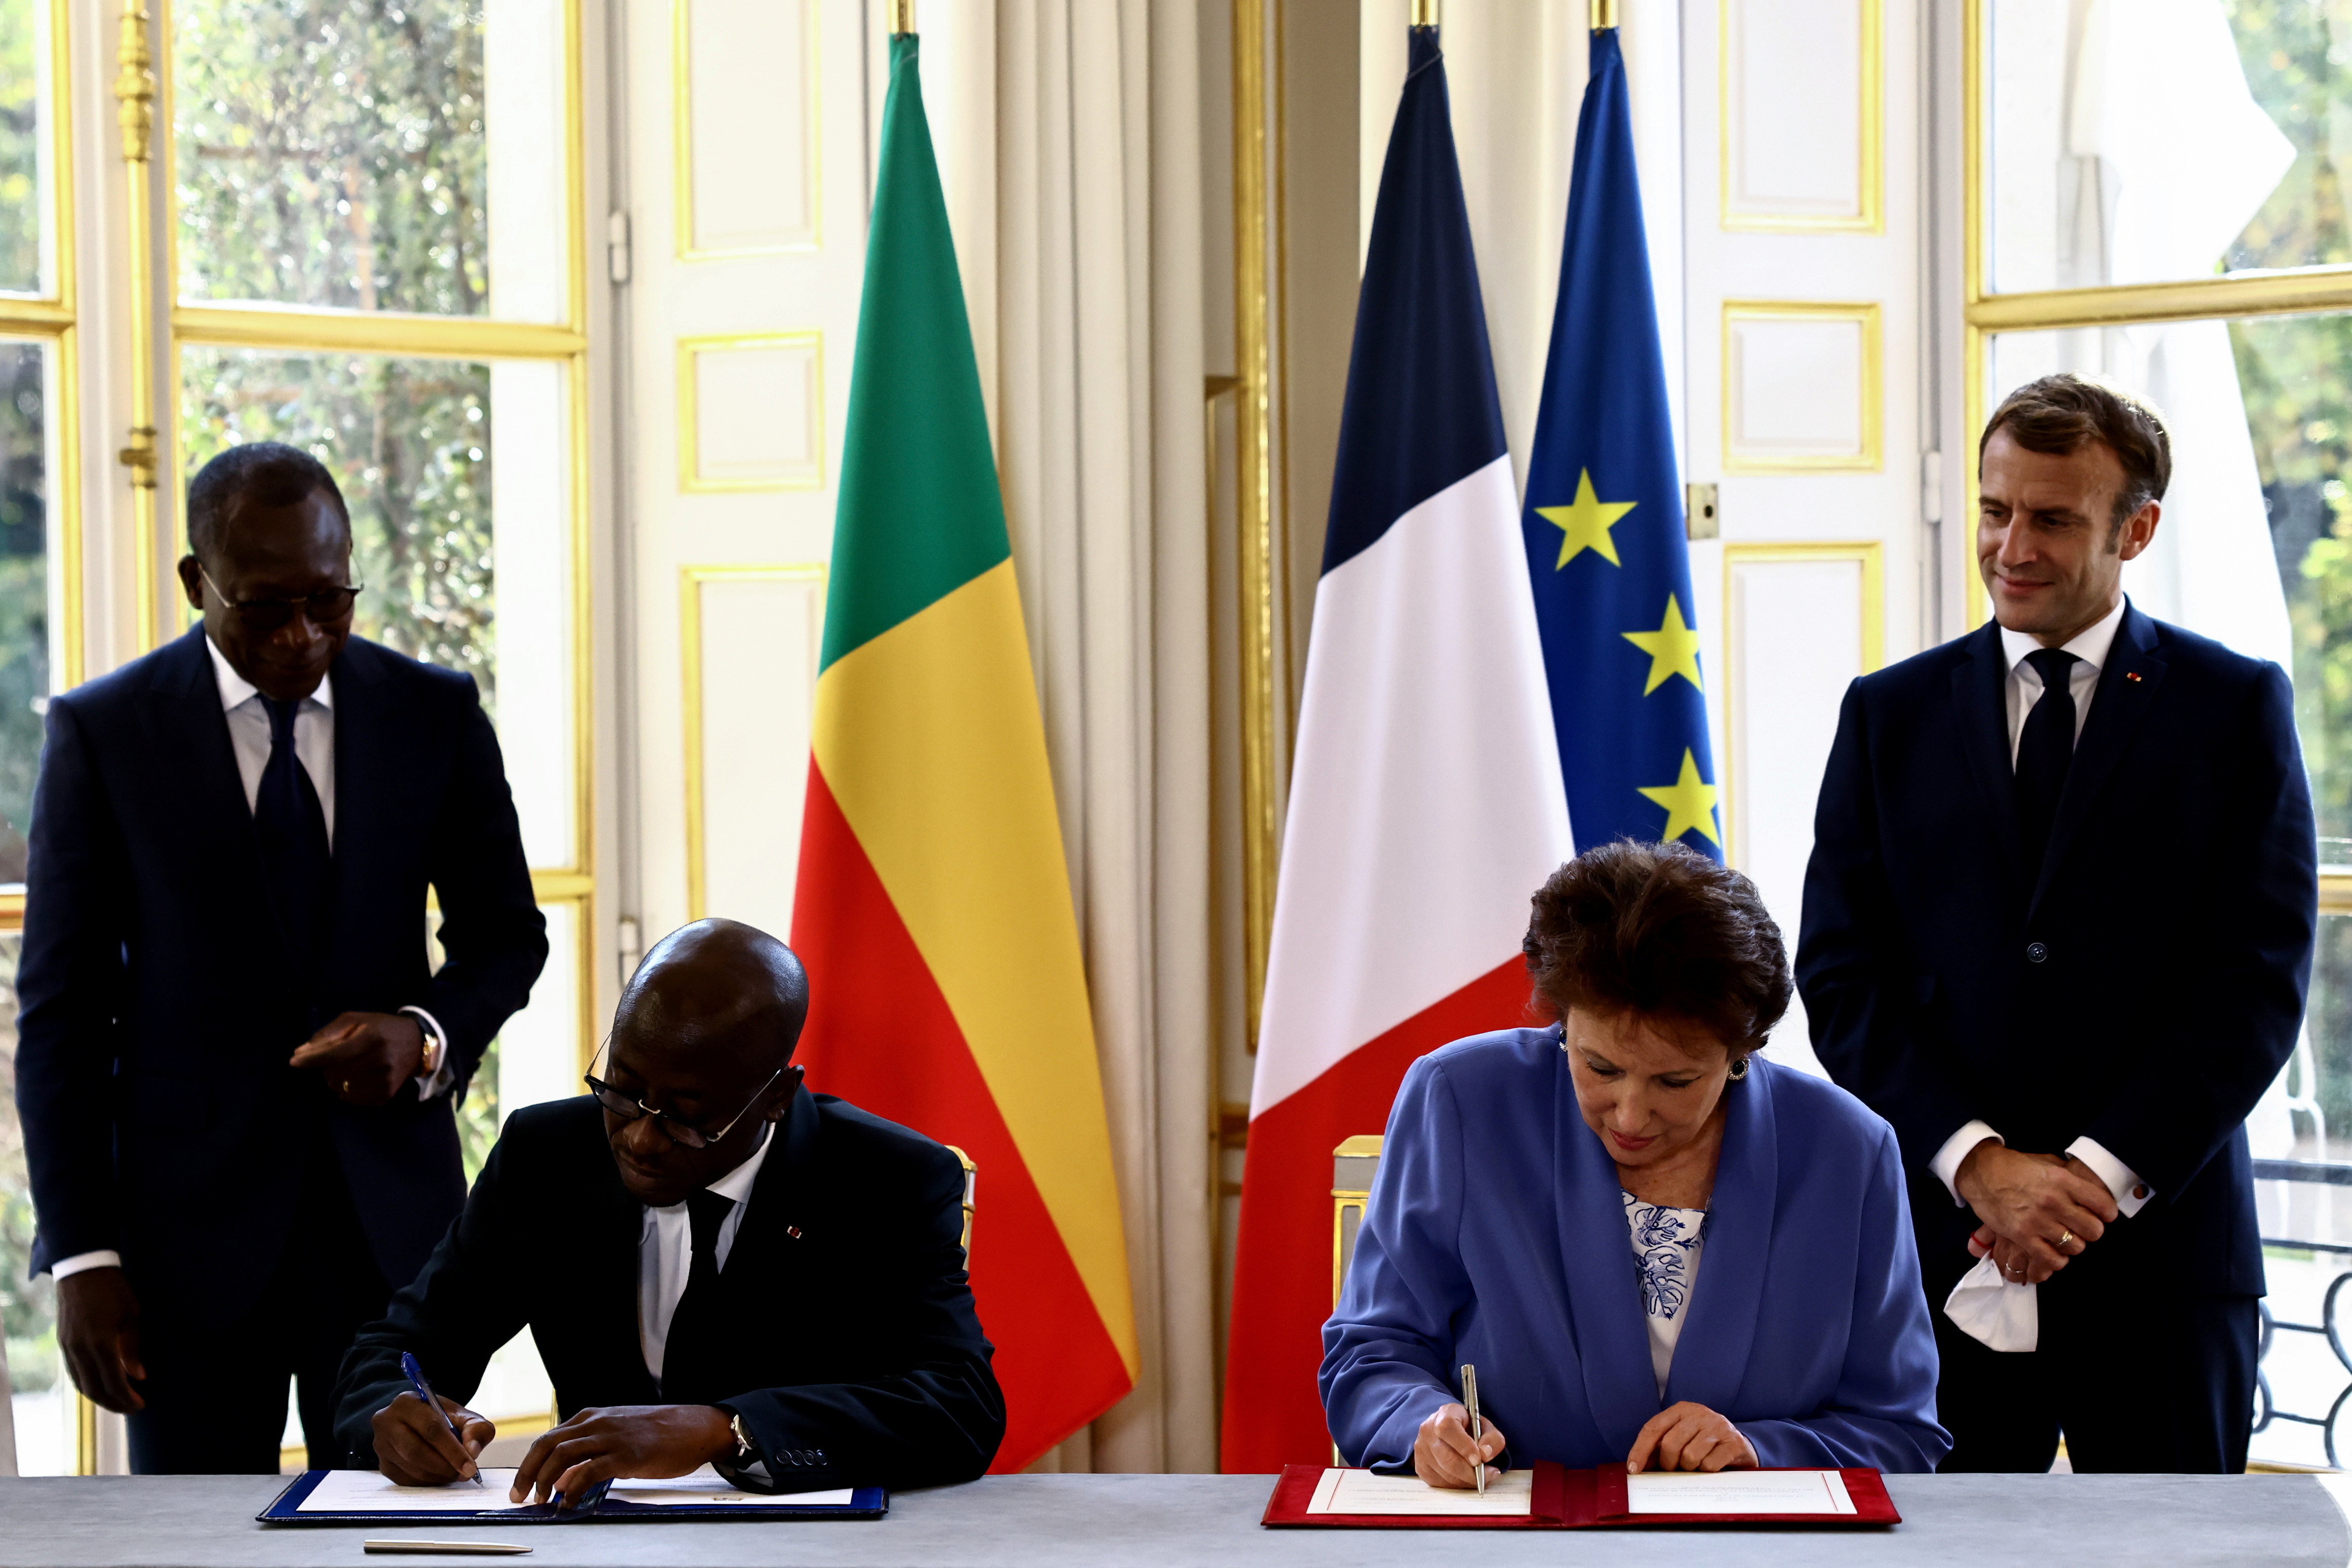 Signing of an agreement between France and Benin about the return of looted cultural artefacts